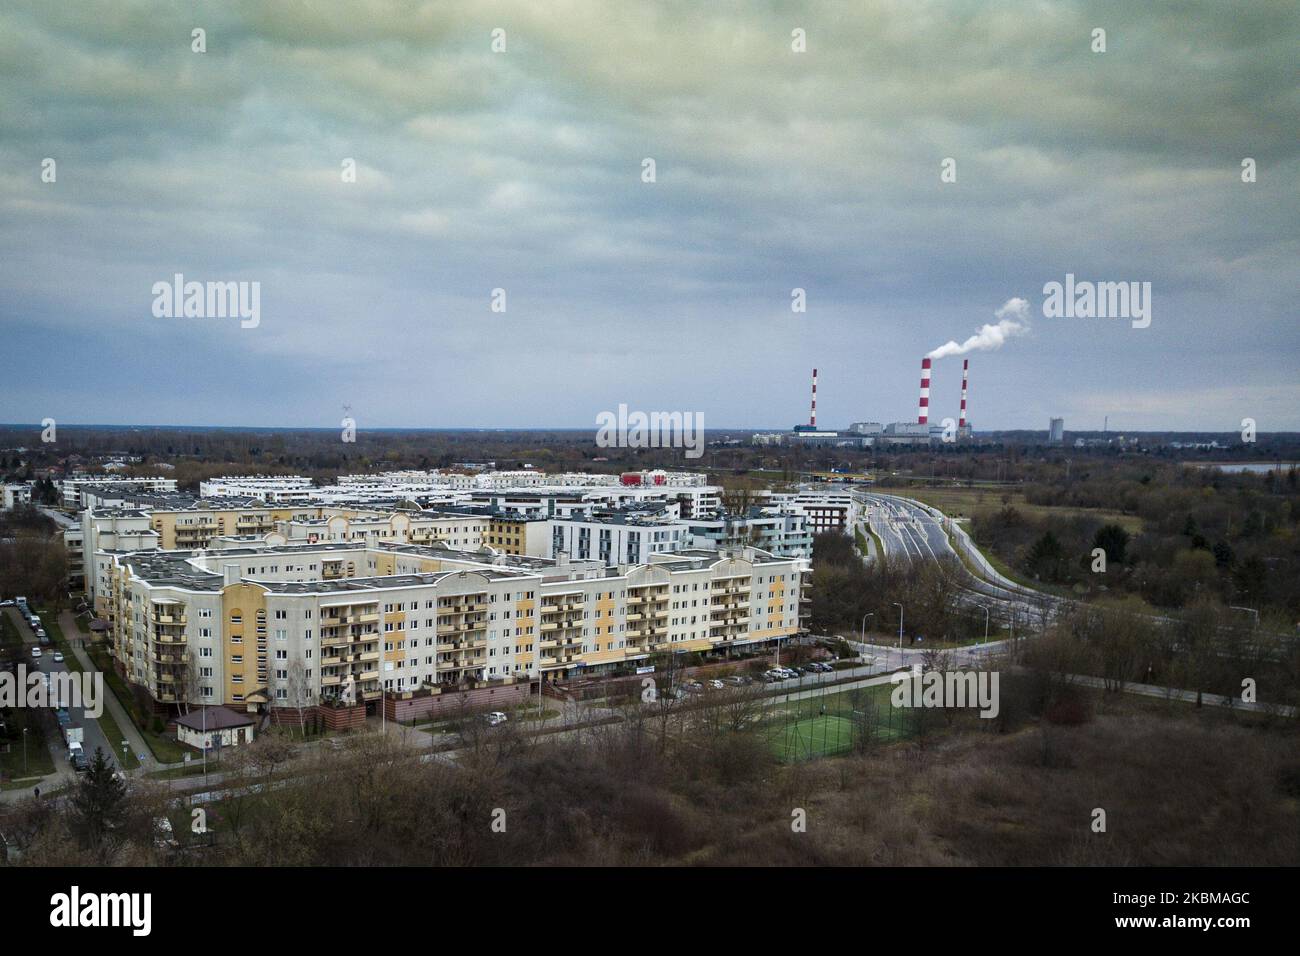 The Siekierki power station is seen a residential area in Warsaw, Poland on March 21, 2020. The Siekierki power station is owned by the Swedish Vattenfall company and operated by the Polish, state owned PGNiG gas and mining company. (Photo by Jaap Arriens/NurPhoto) Stock Photo